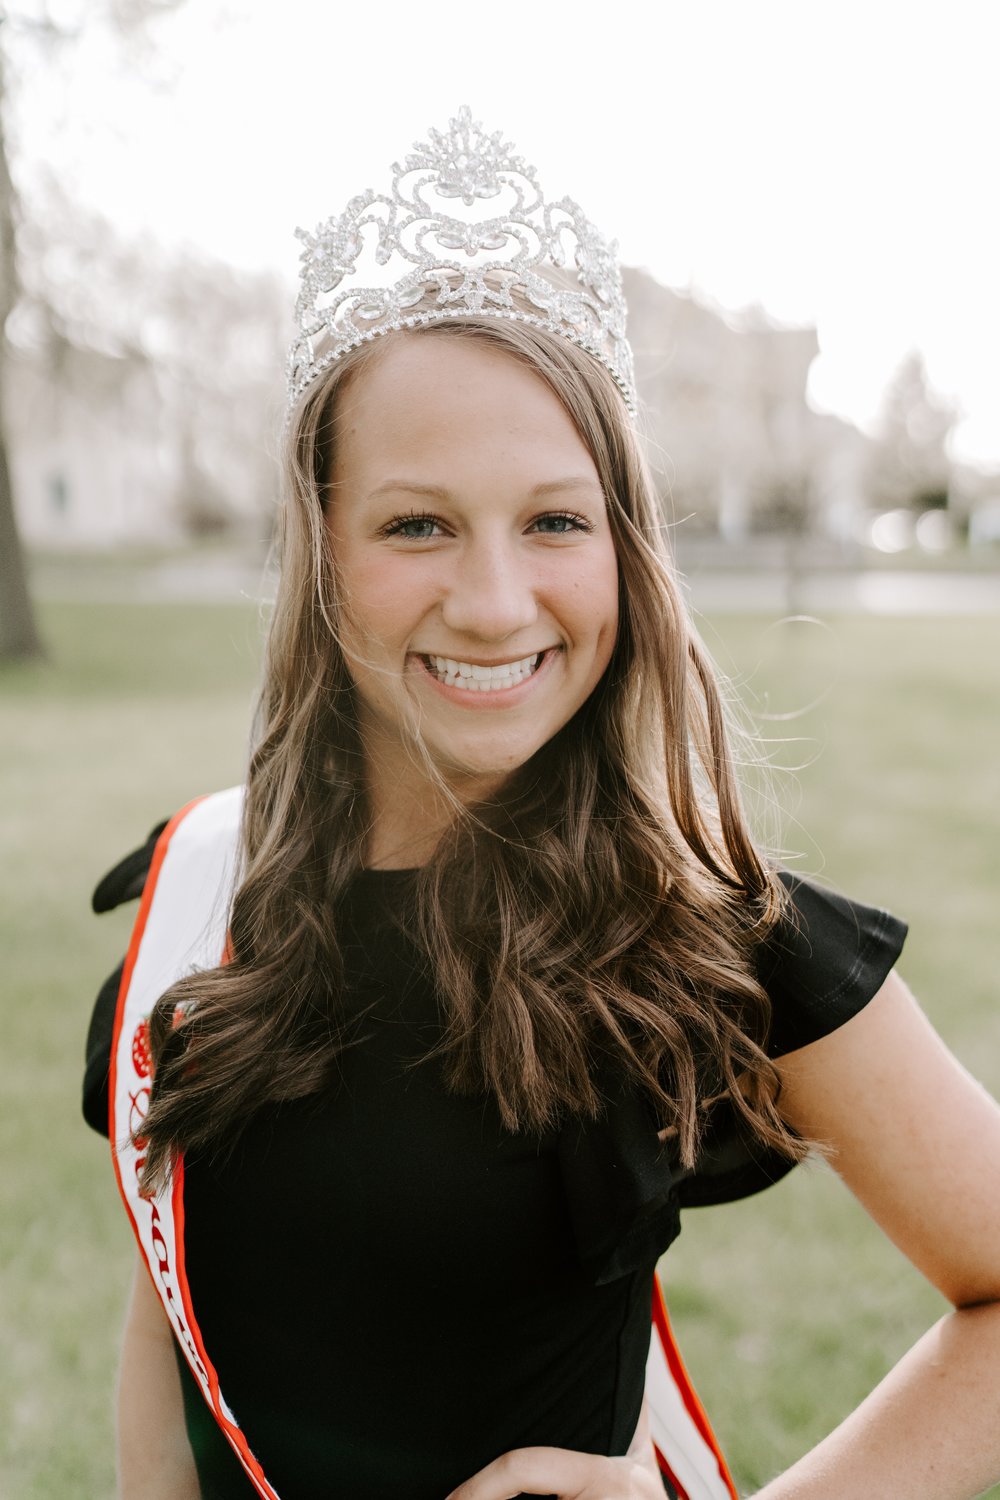 Reese Minnette, a Crawfordsville High School senior, will reign over this year's Strawberry Festival, which begins Friday and continues through Sunday on the grounds of Lane Place.